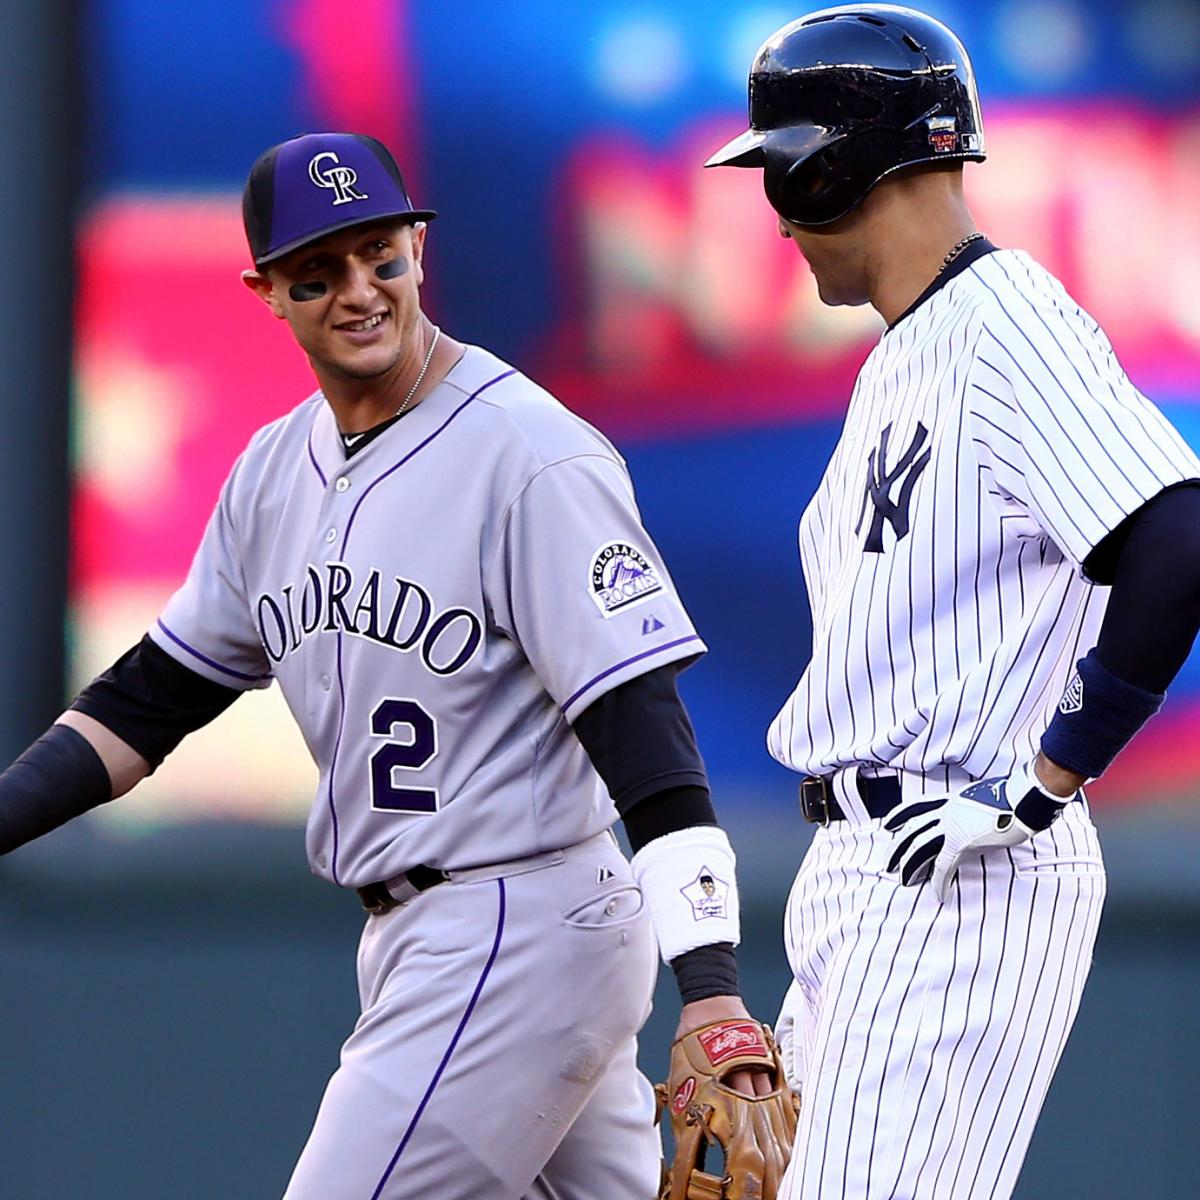 Considering Troy Tulowitzki for Oakland A's at second base